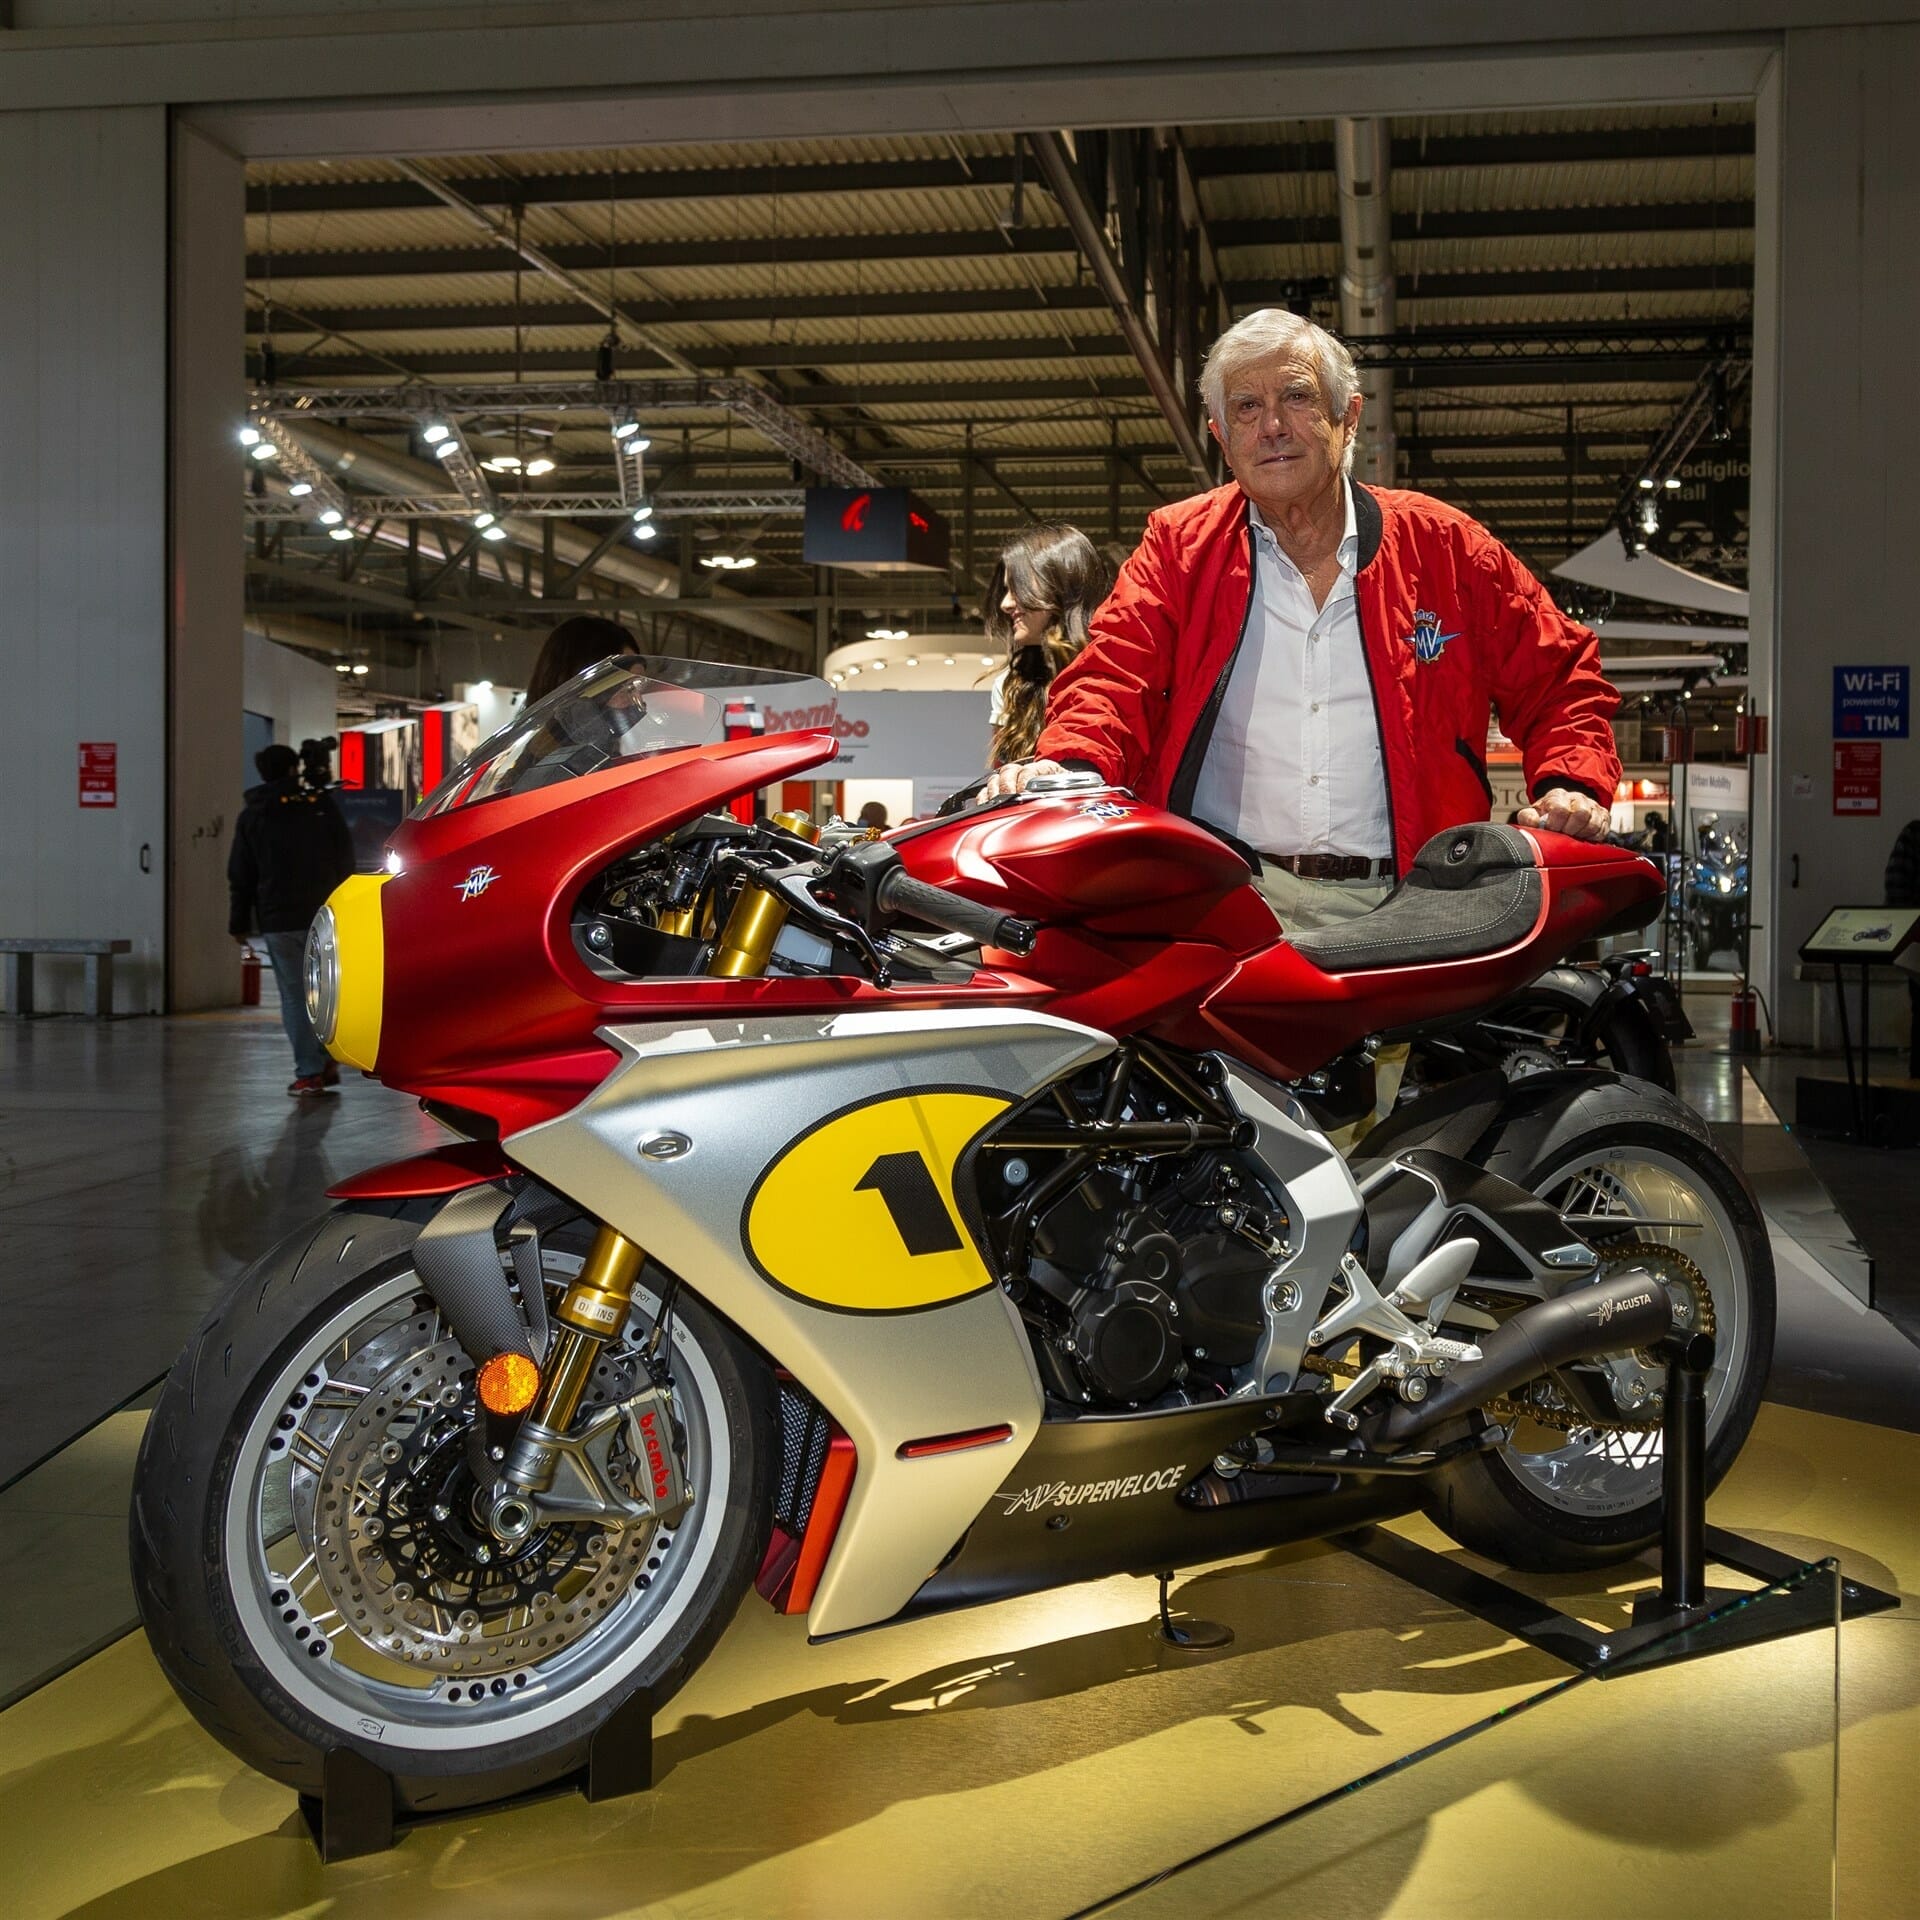 Most beautiful motorcycle of EICMA 2021
- also in the MOTORCYCLES.NEWS APP